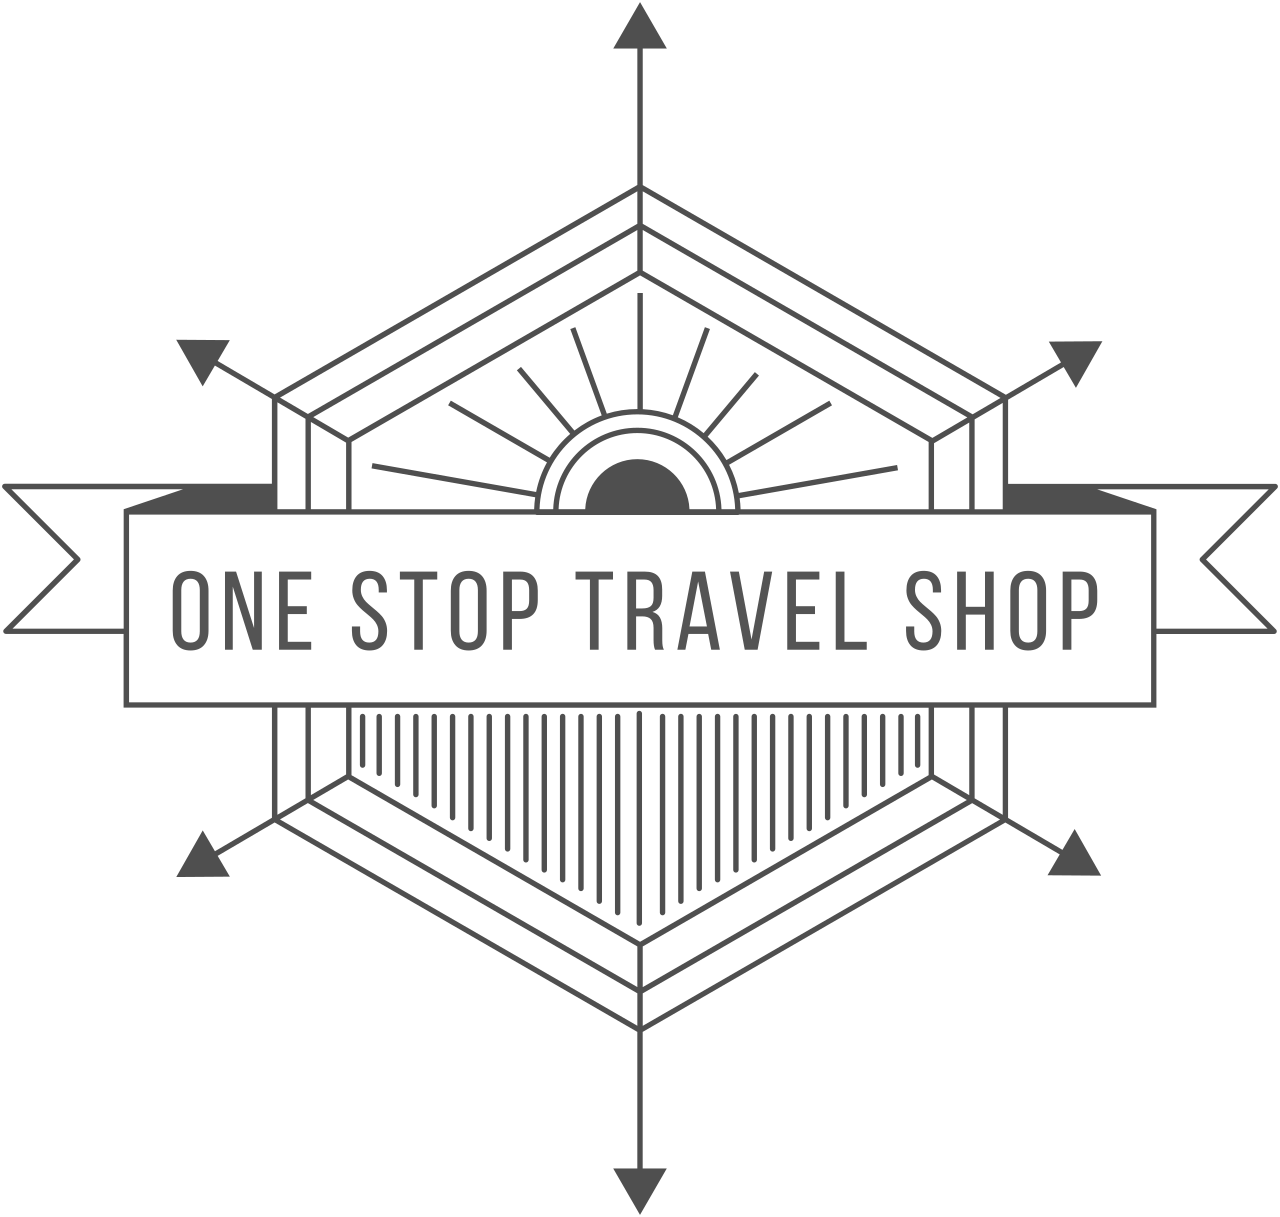 One Stop Travel Shop's logo